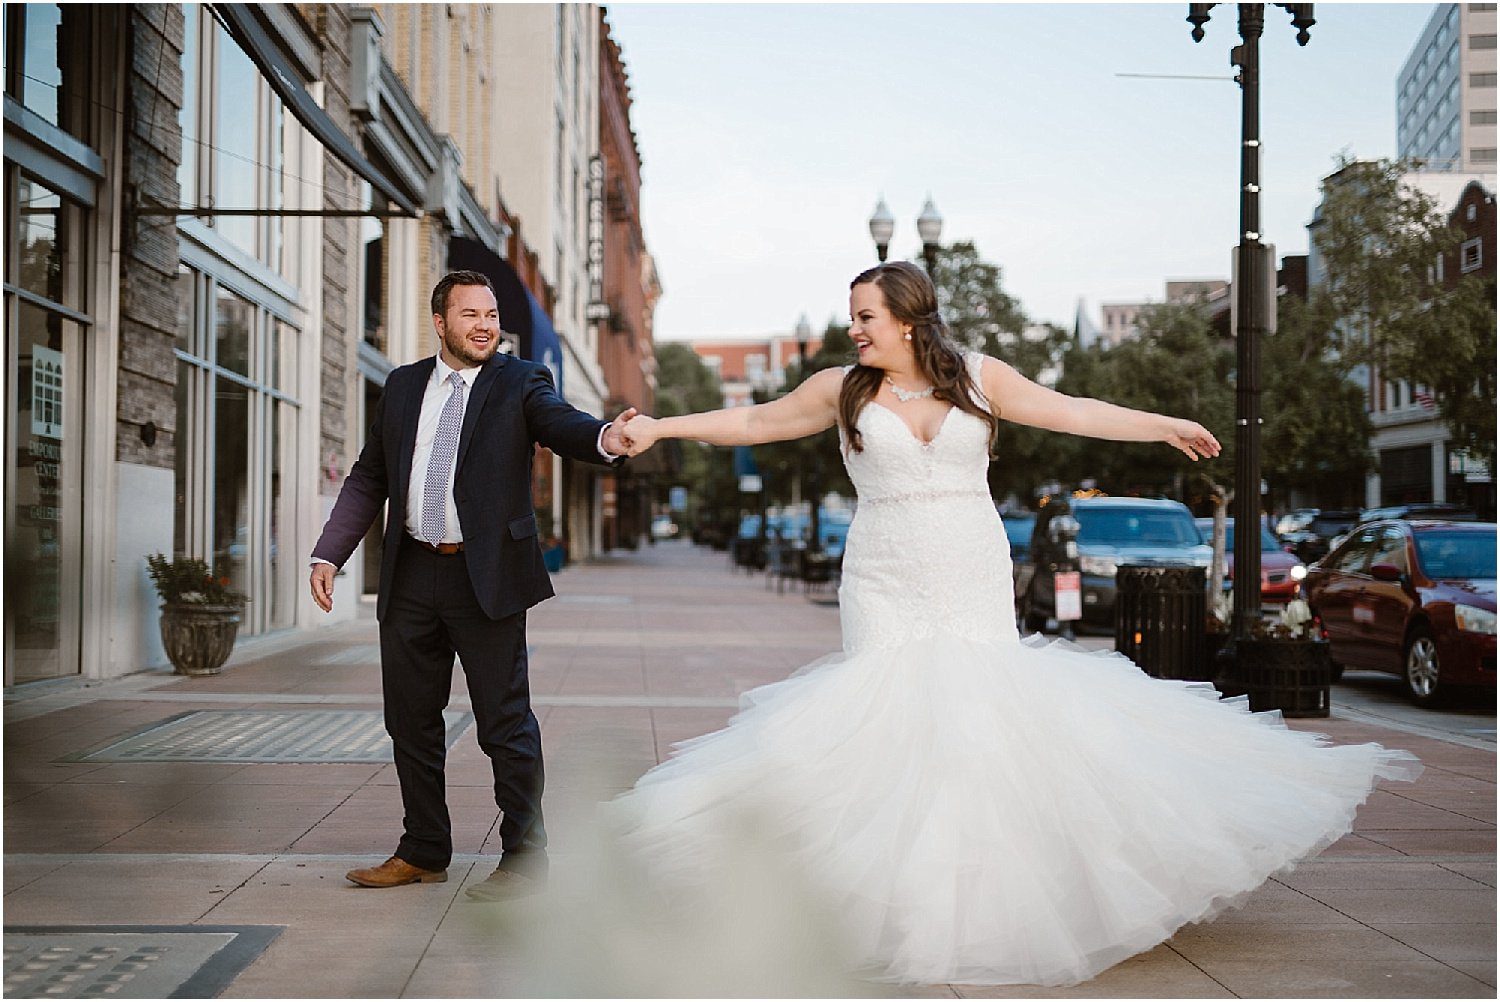 Wedding Day Couple Photos in Downtown Knoxville